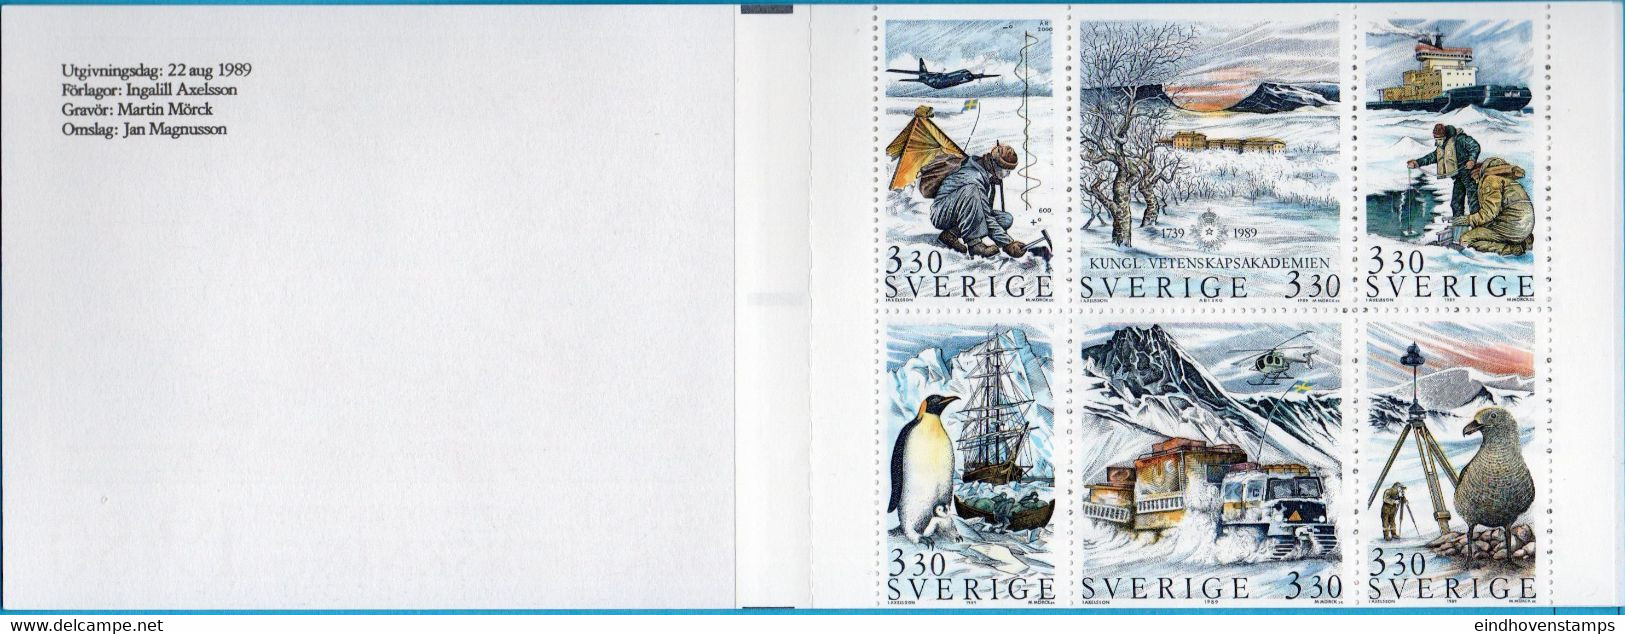 Sweden Sverige 1989 Stamp Booklet Polar Research Cancelled Academy Of Science MNH 89M141 - Research Programs